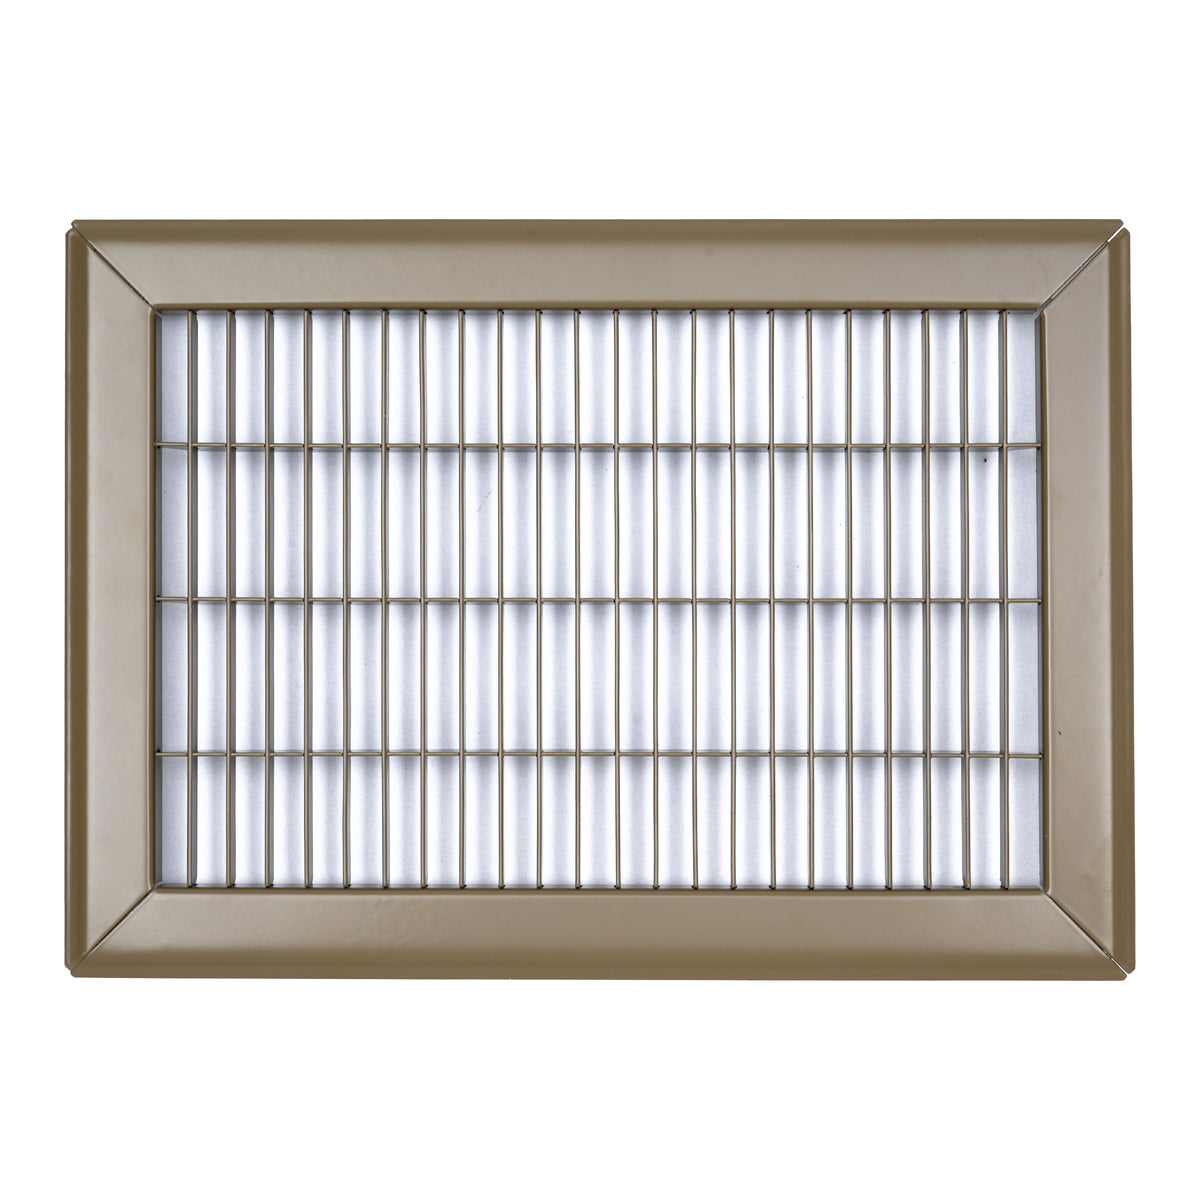 8"W x 12"H [Duct Opening] Return Air Floor Grille | Vent Cover Grill for Floor - Brown| Outer Dimensions: 9.75"W X 13.75"H